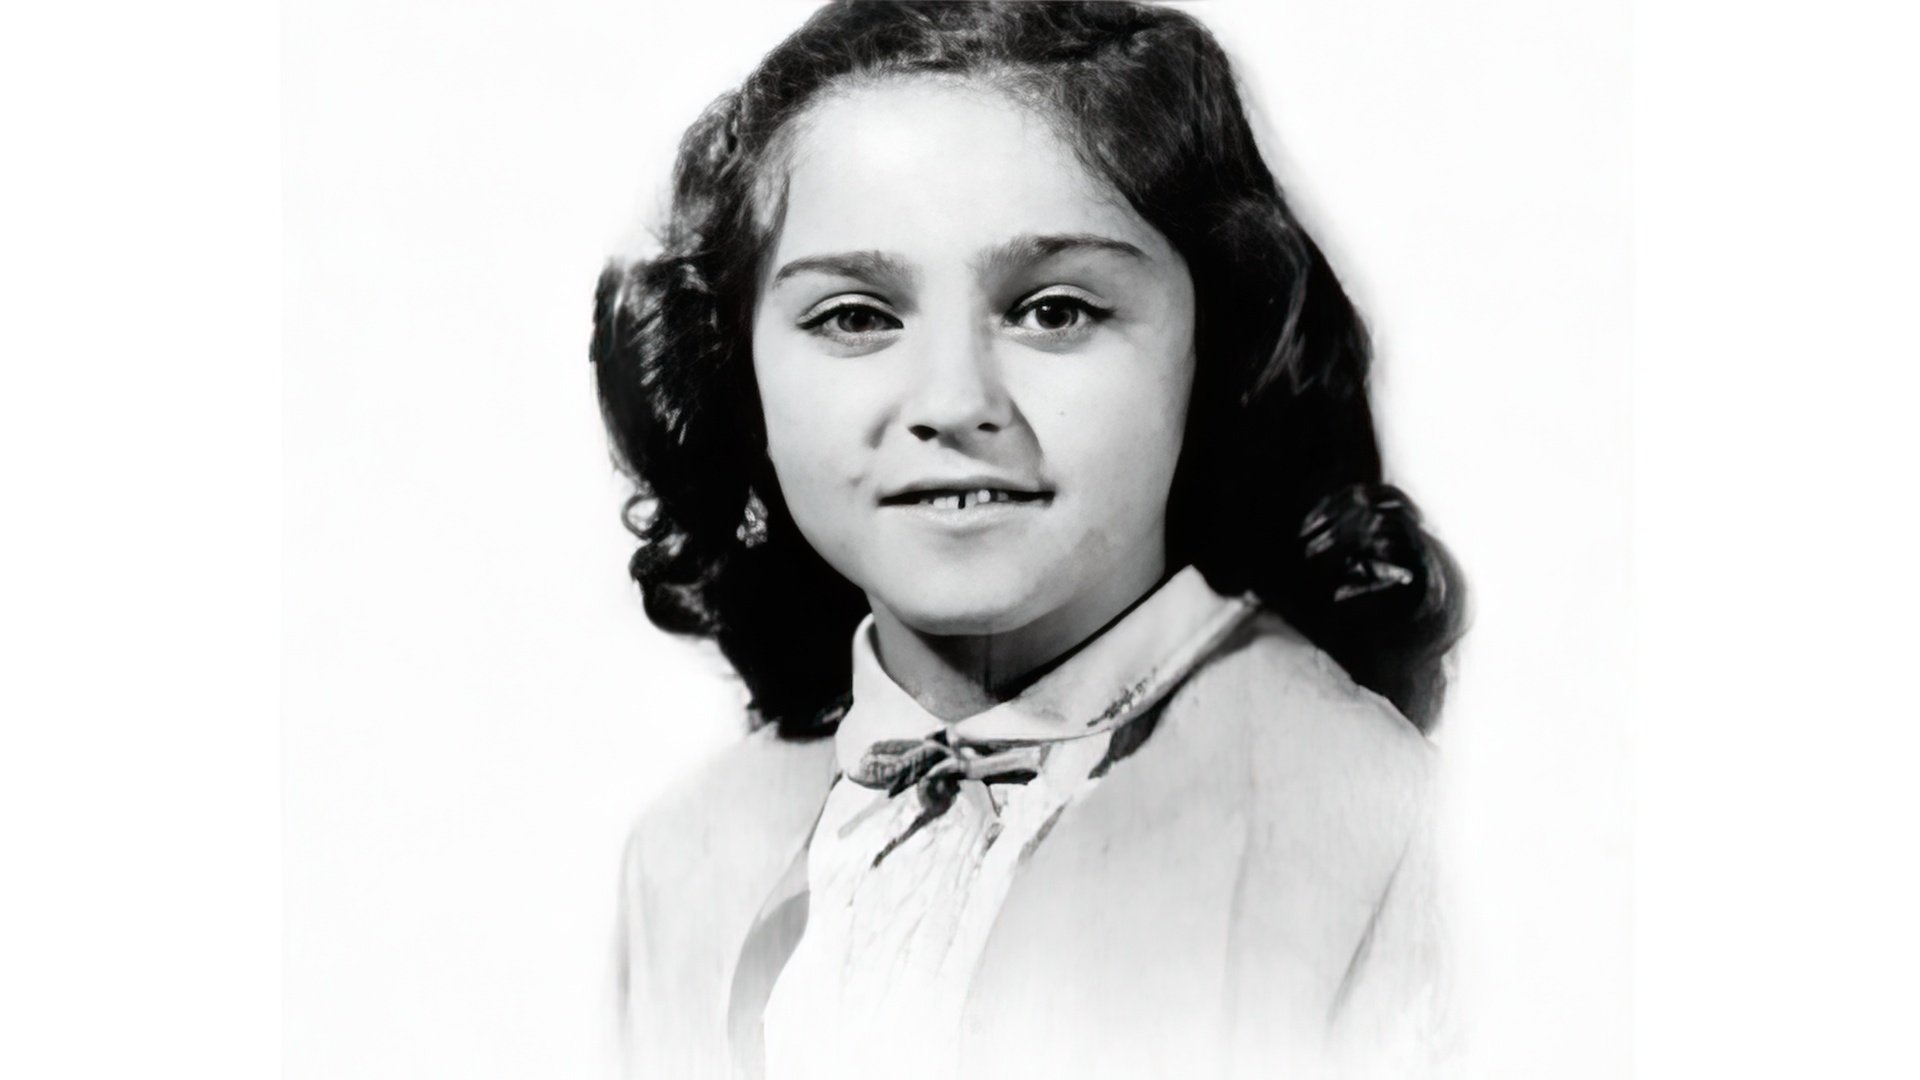 Madonna as a child